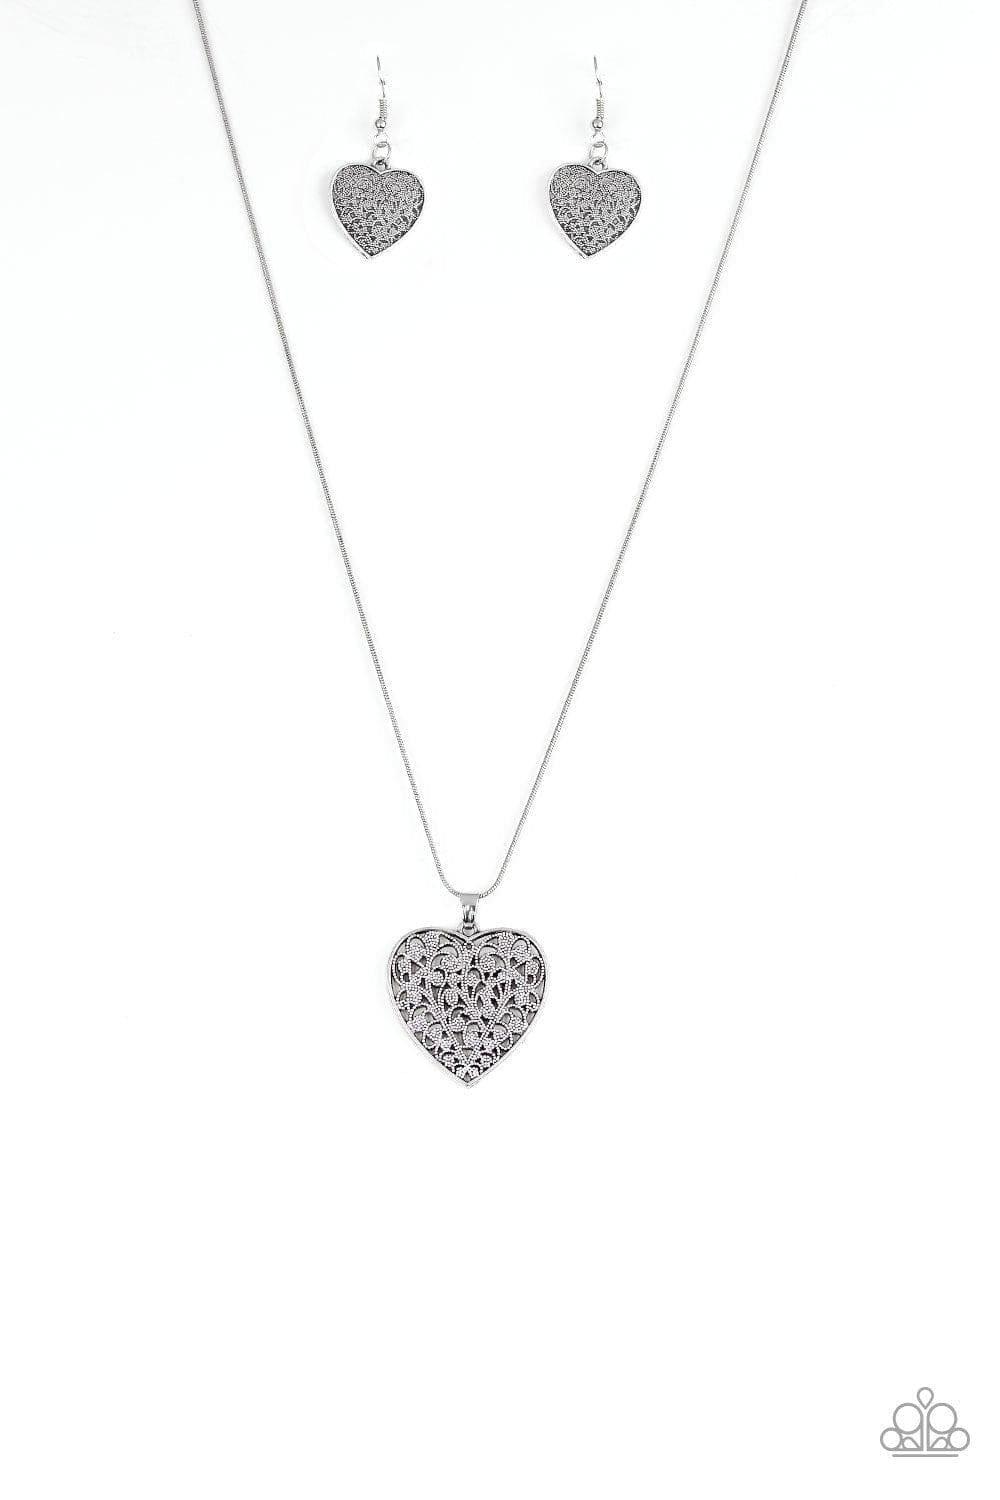 Paparazzi Accessories - Look Into Your Heart - Silver Necklace - Bling by JessieK